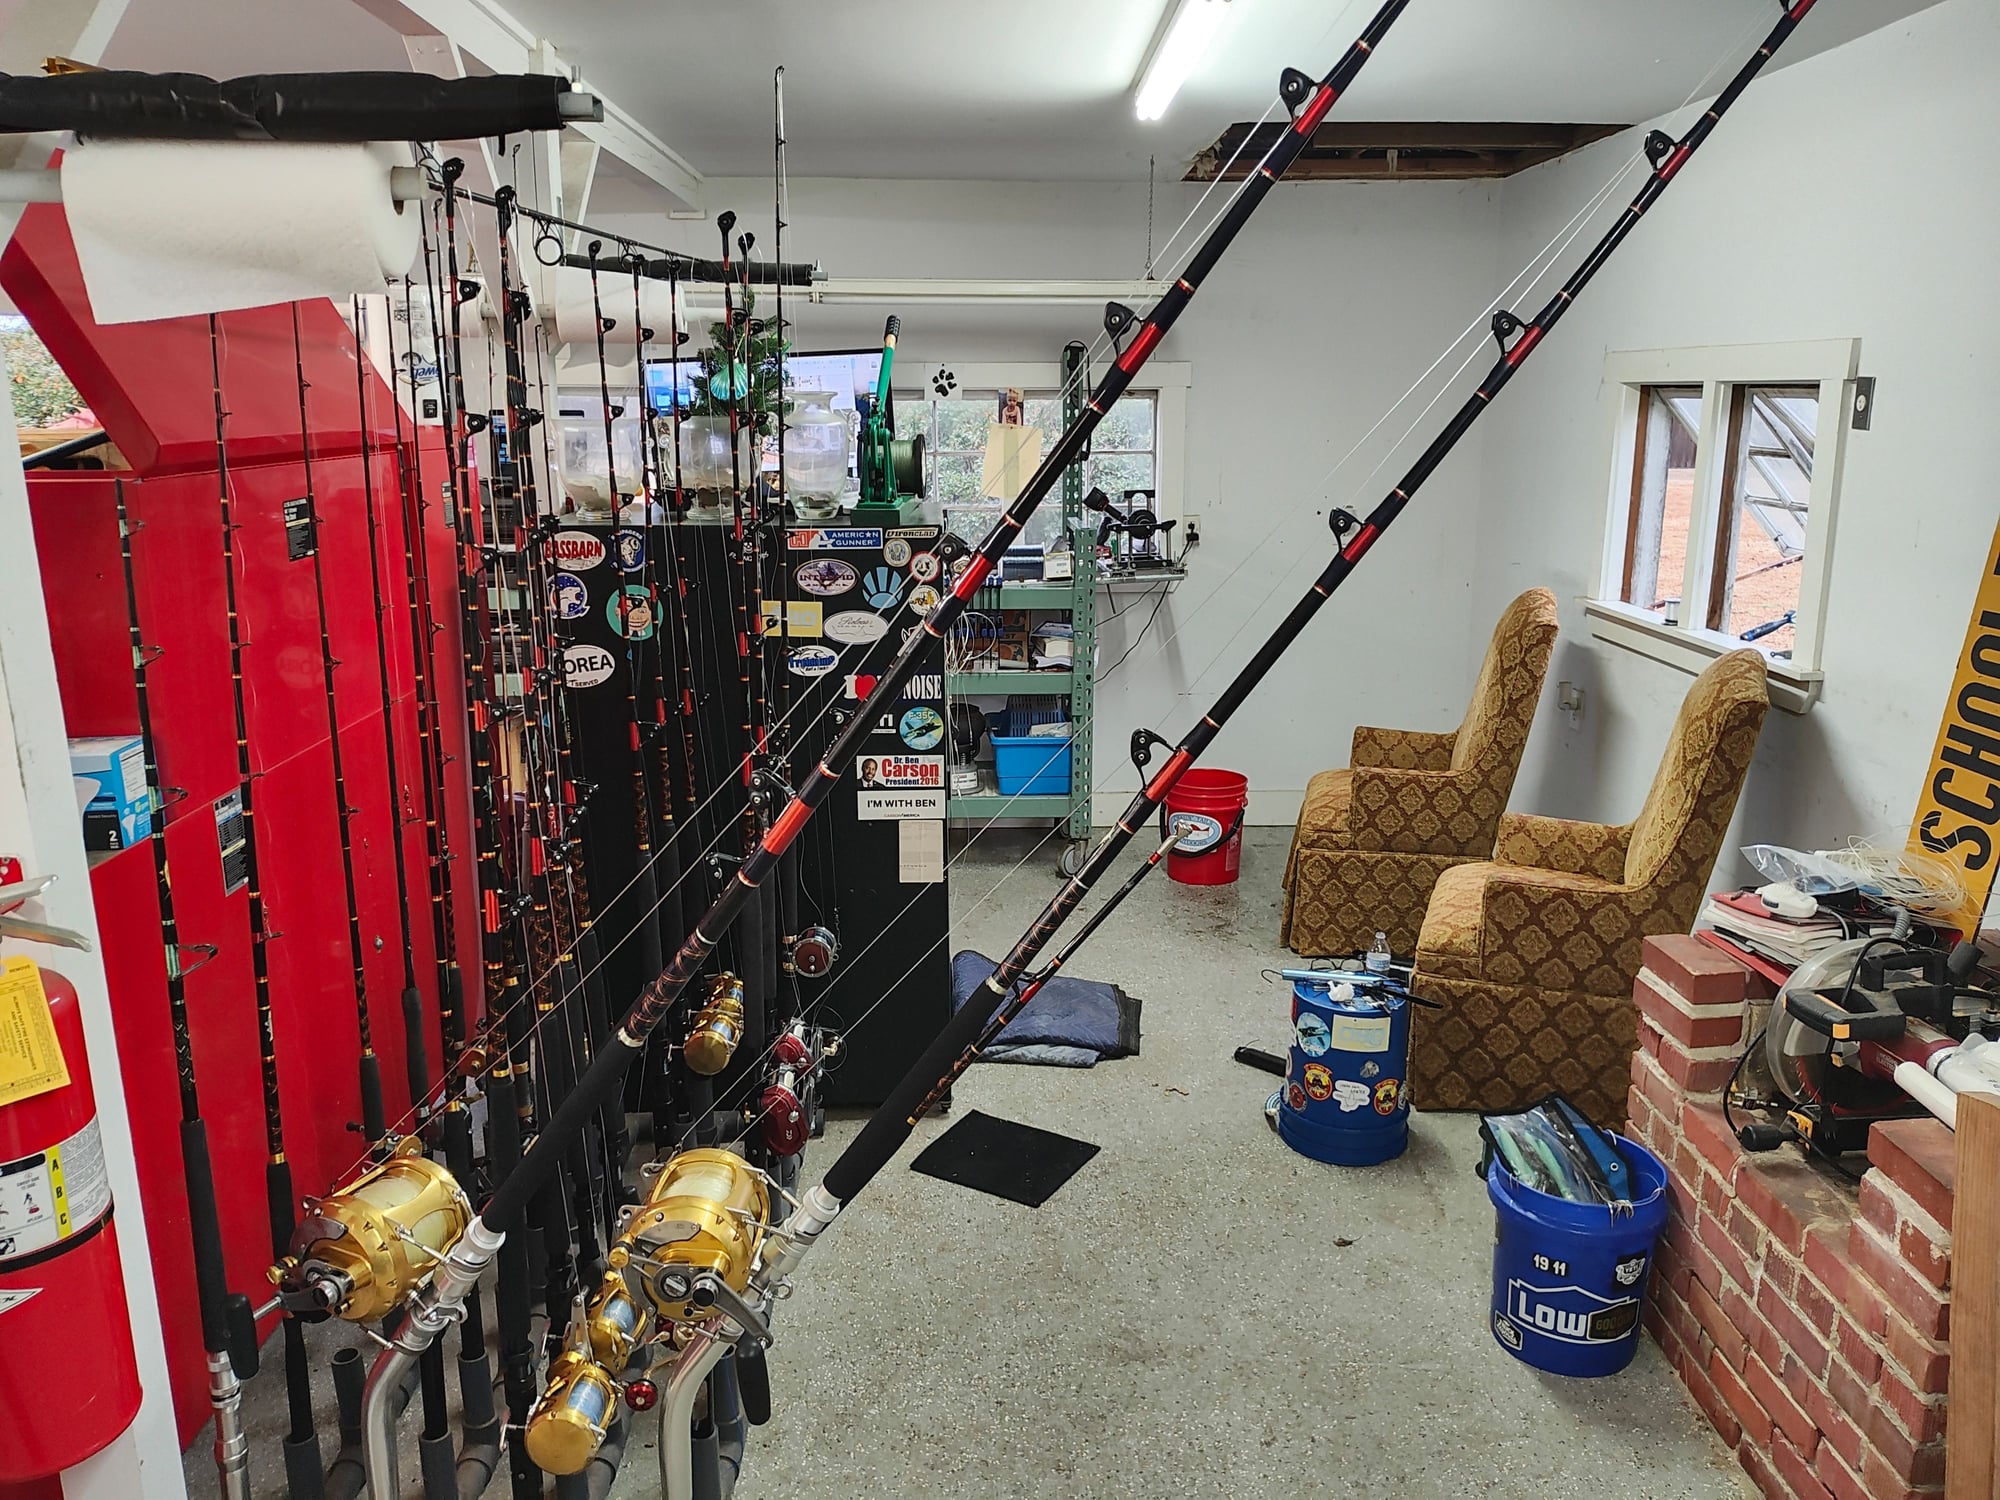 Garage rod/tackle storage ideas? - The Hull Truth - Boating and Fishing  Forum